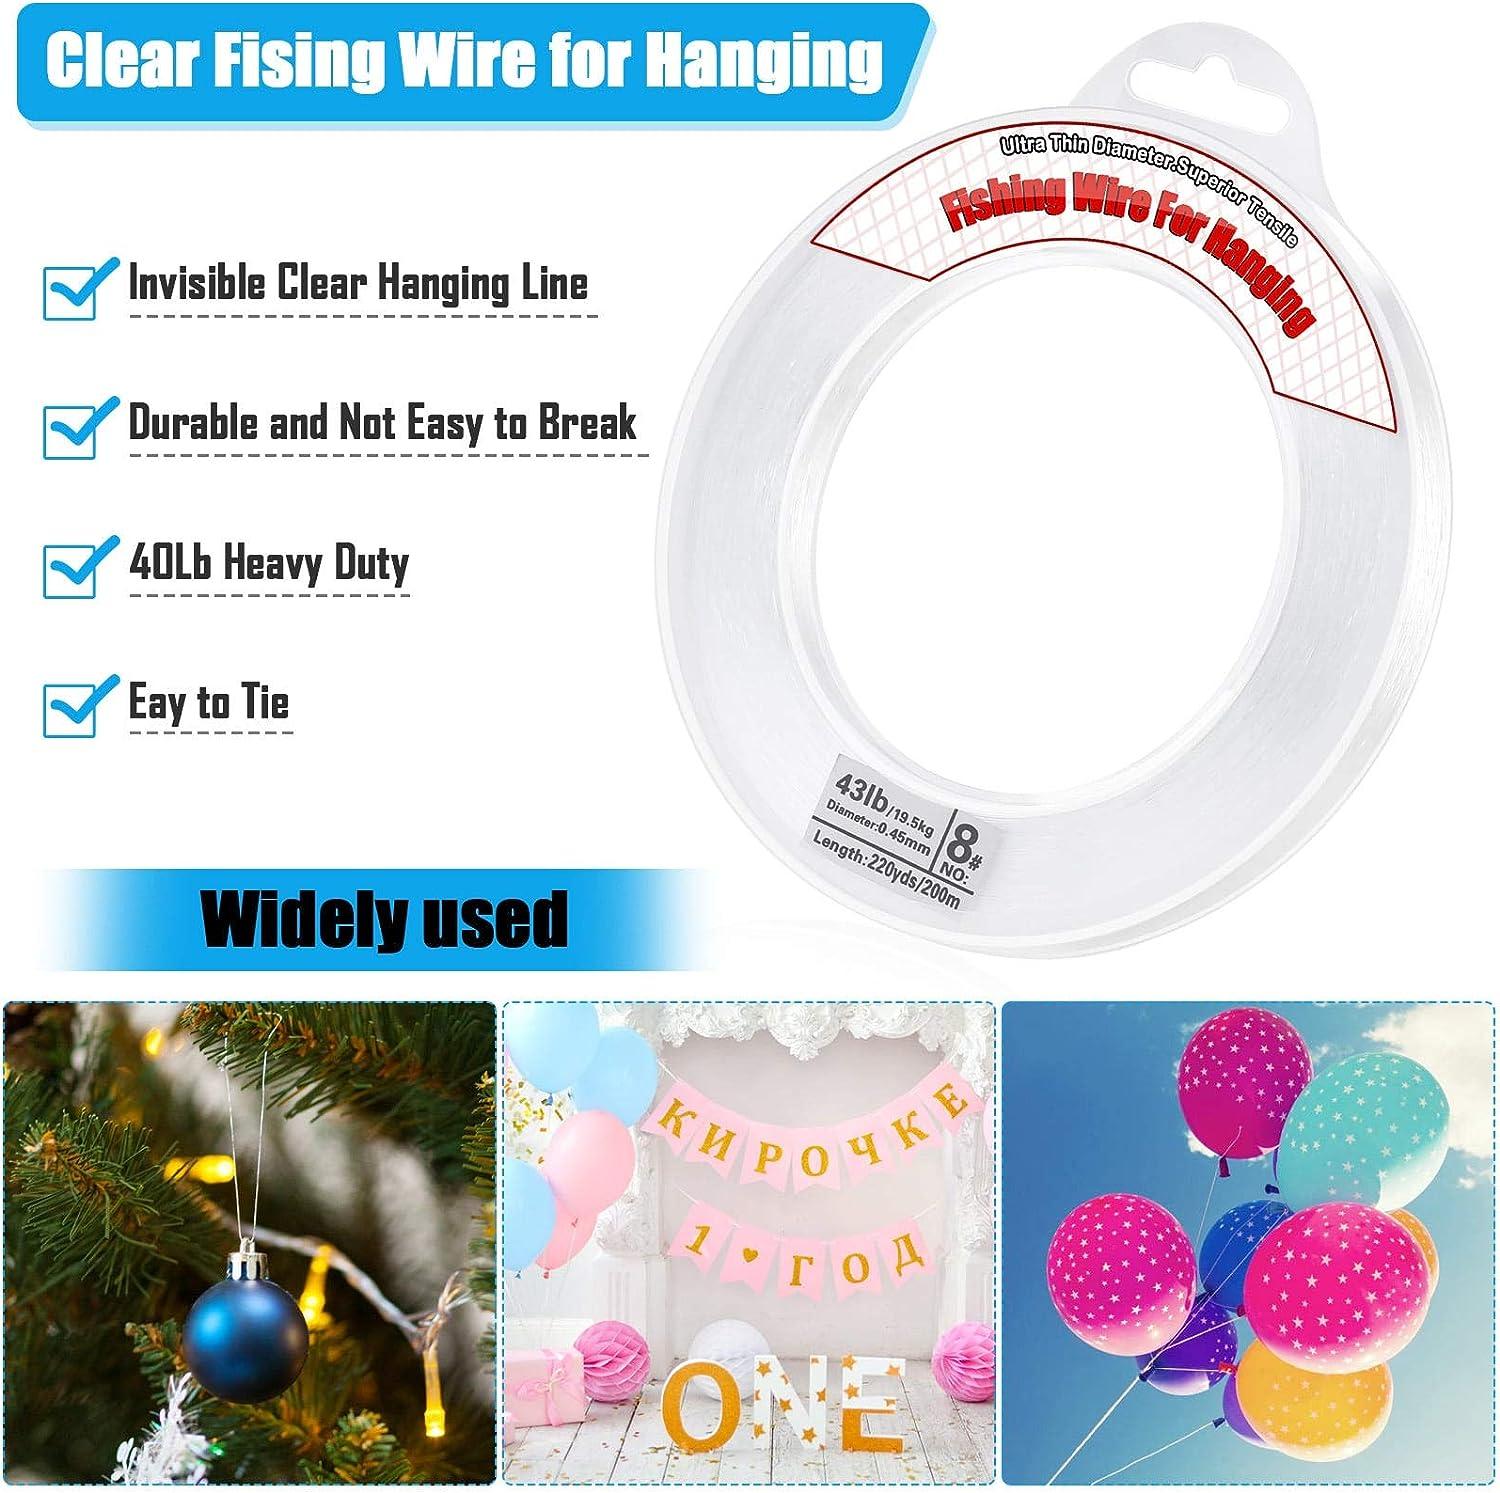 Clear Fishing Wire, Acejoz 656FT Fishing Line Clear Invisible Hanging Wire  Strong Nylon String Supports 40 Pounds for Balloon Garland Hanging  Decorations 0.45mm, 656ft, 40lb